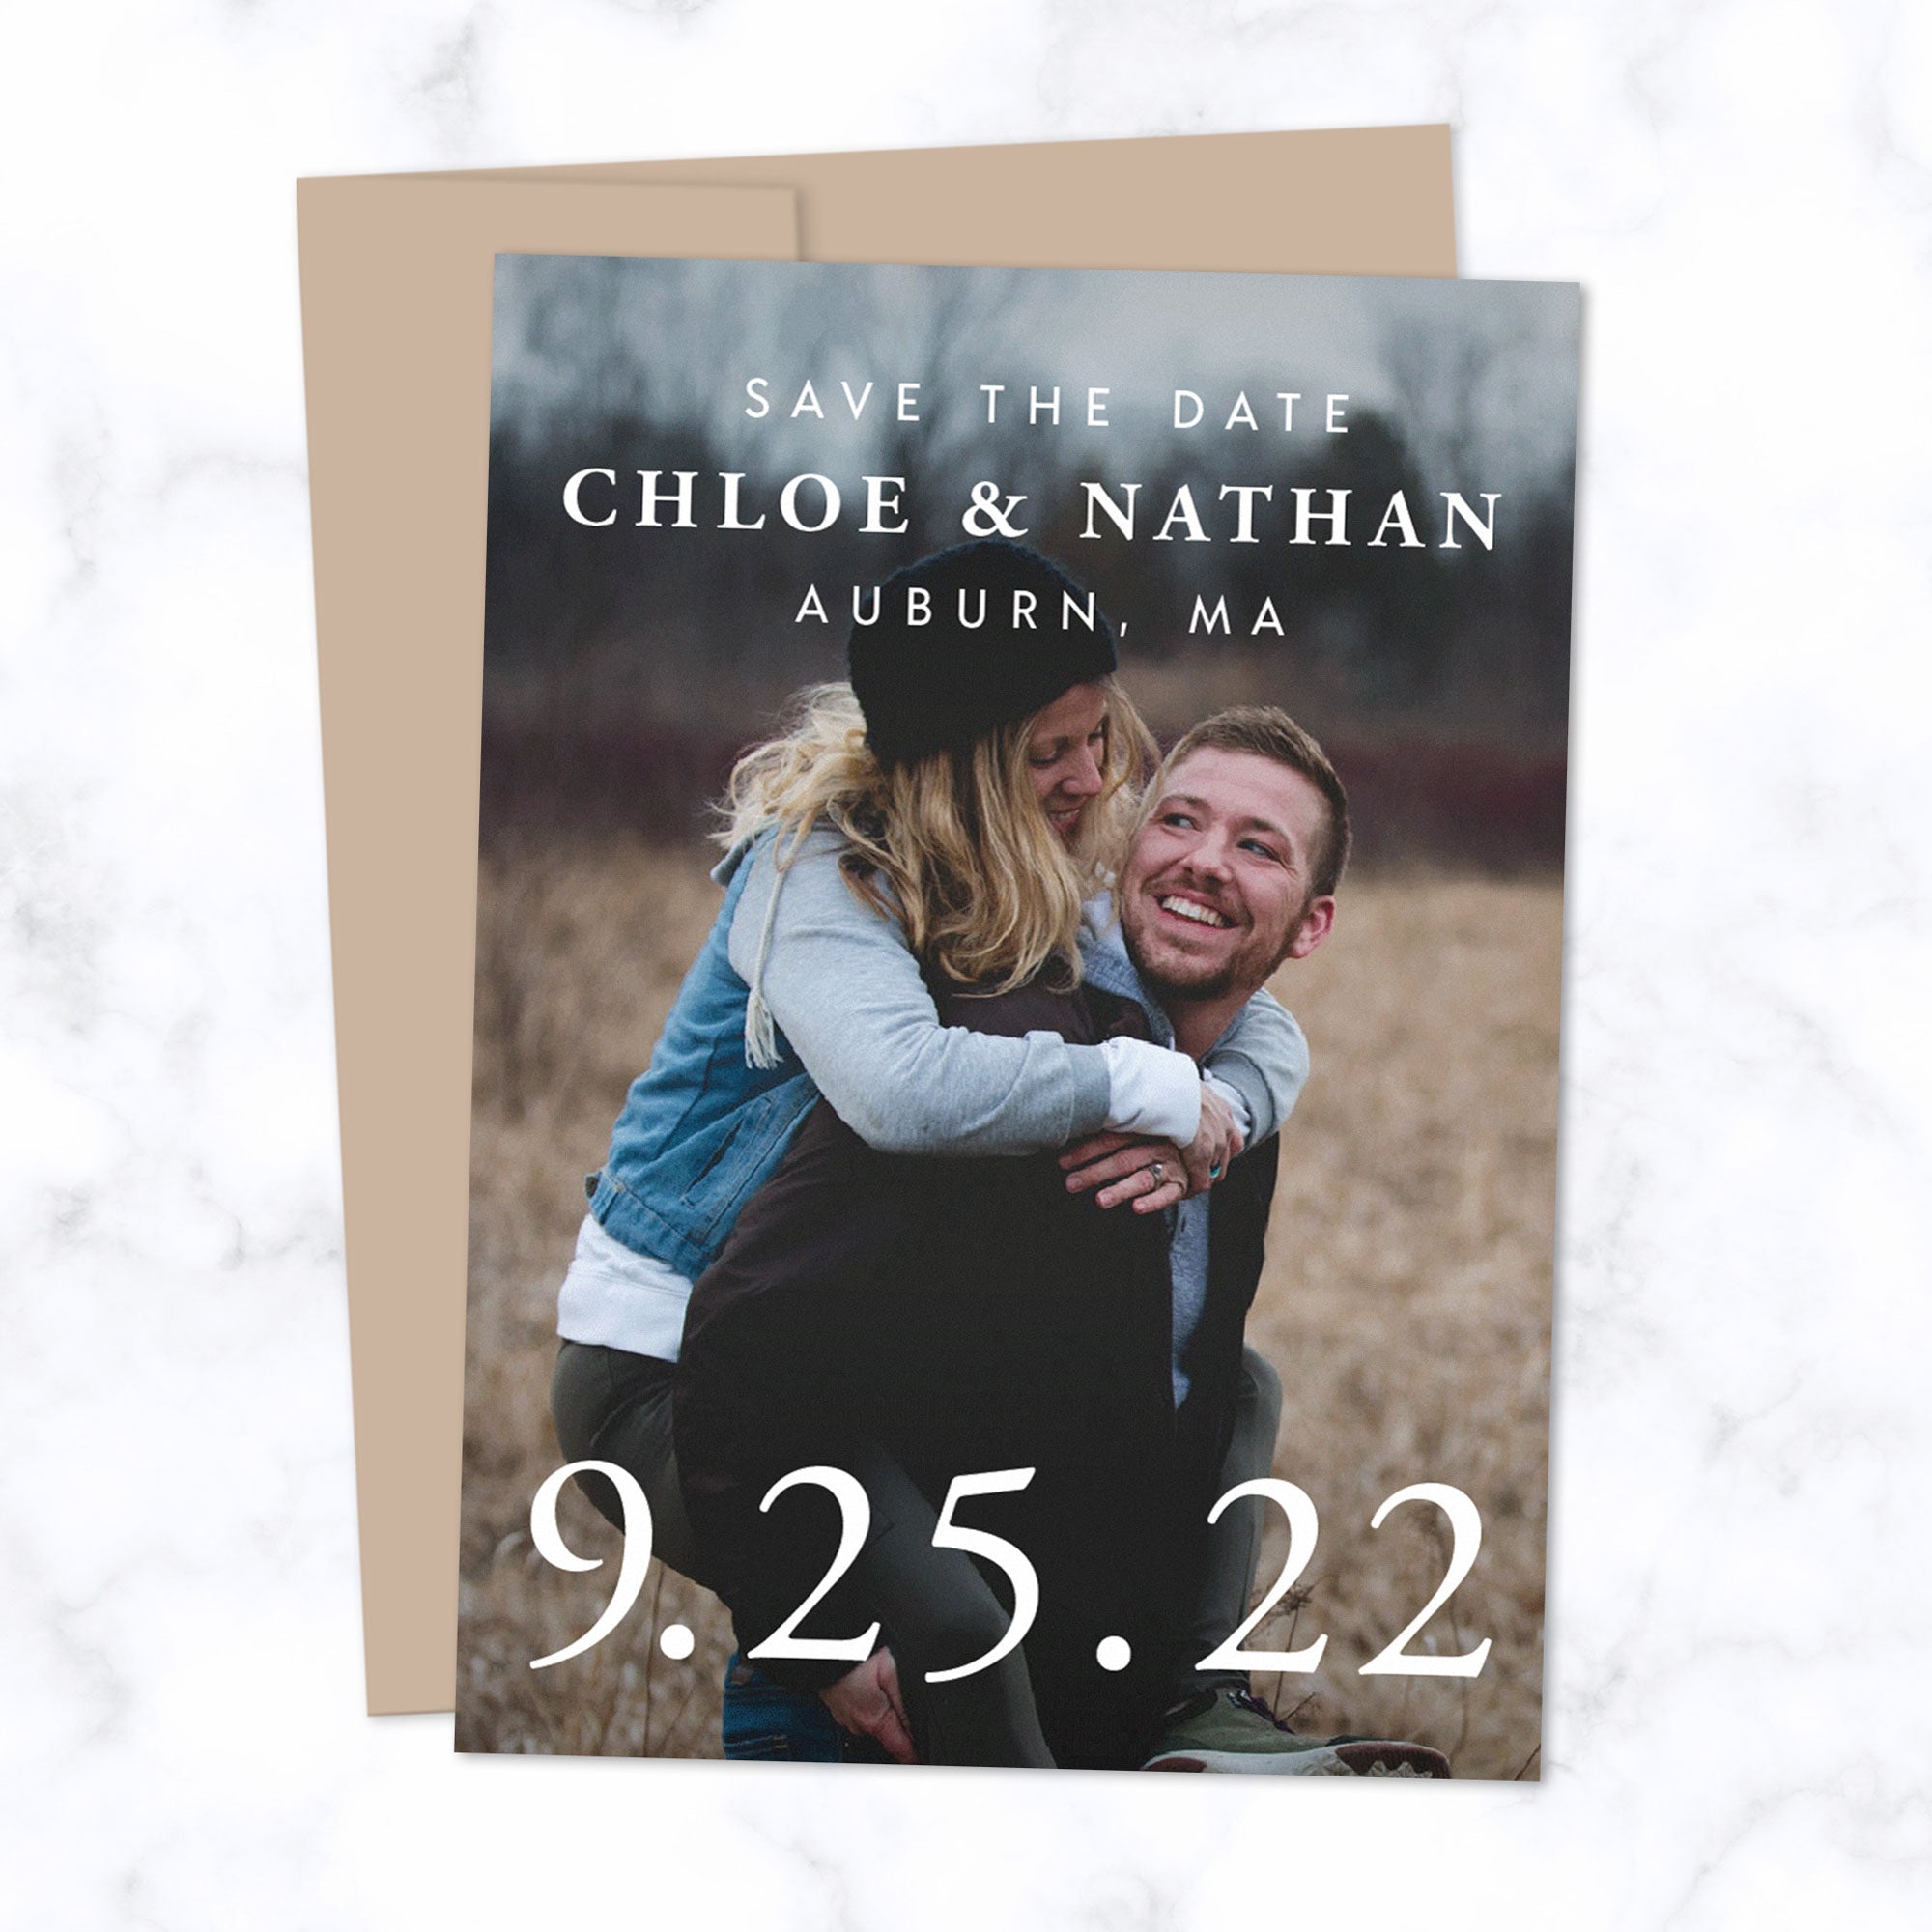 Classic Type Save the Date Cards with Full Frame Photo, Extra Large Date and Minimal Modern Typography shown with Harvest Brown Envelope